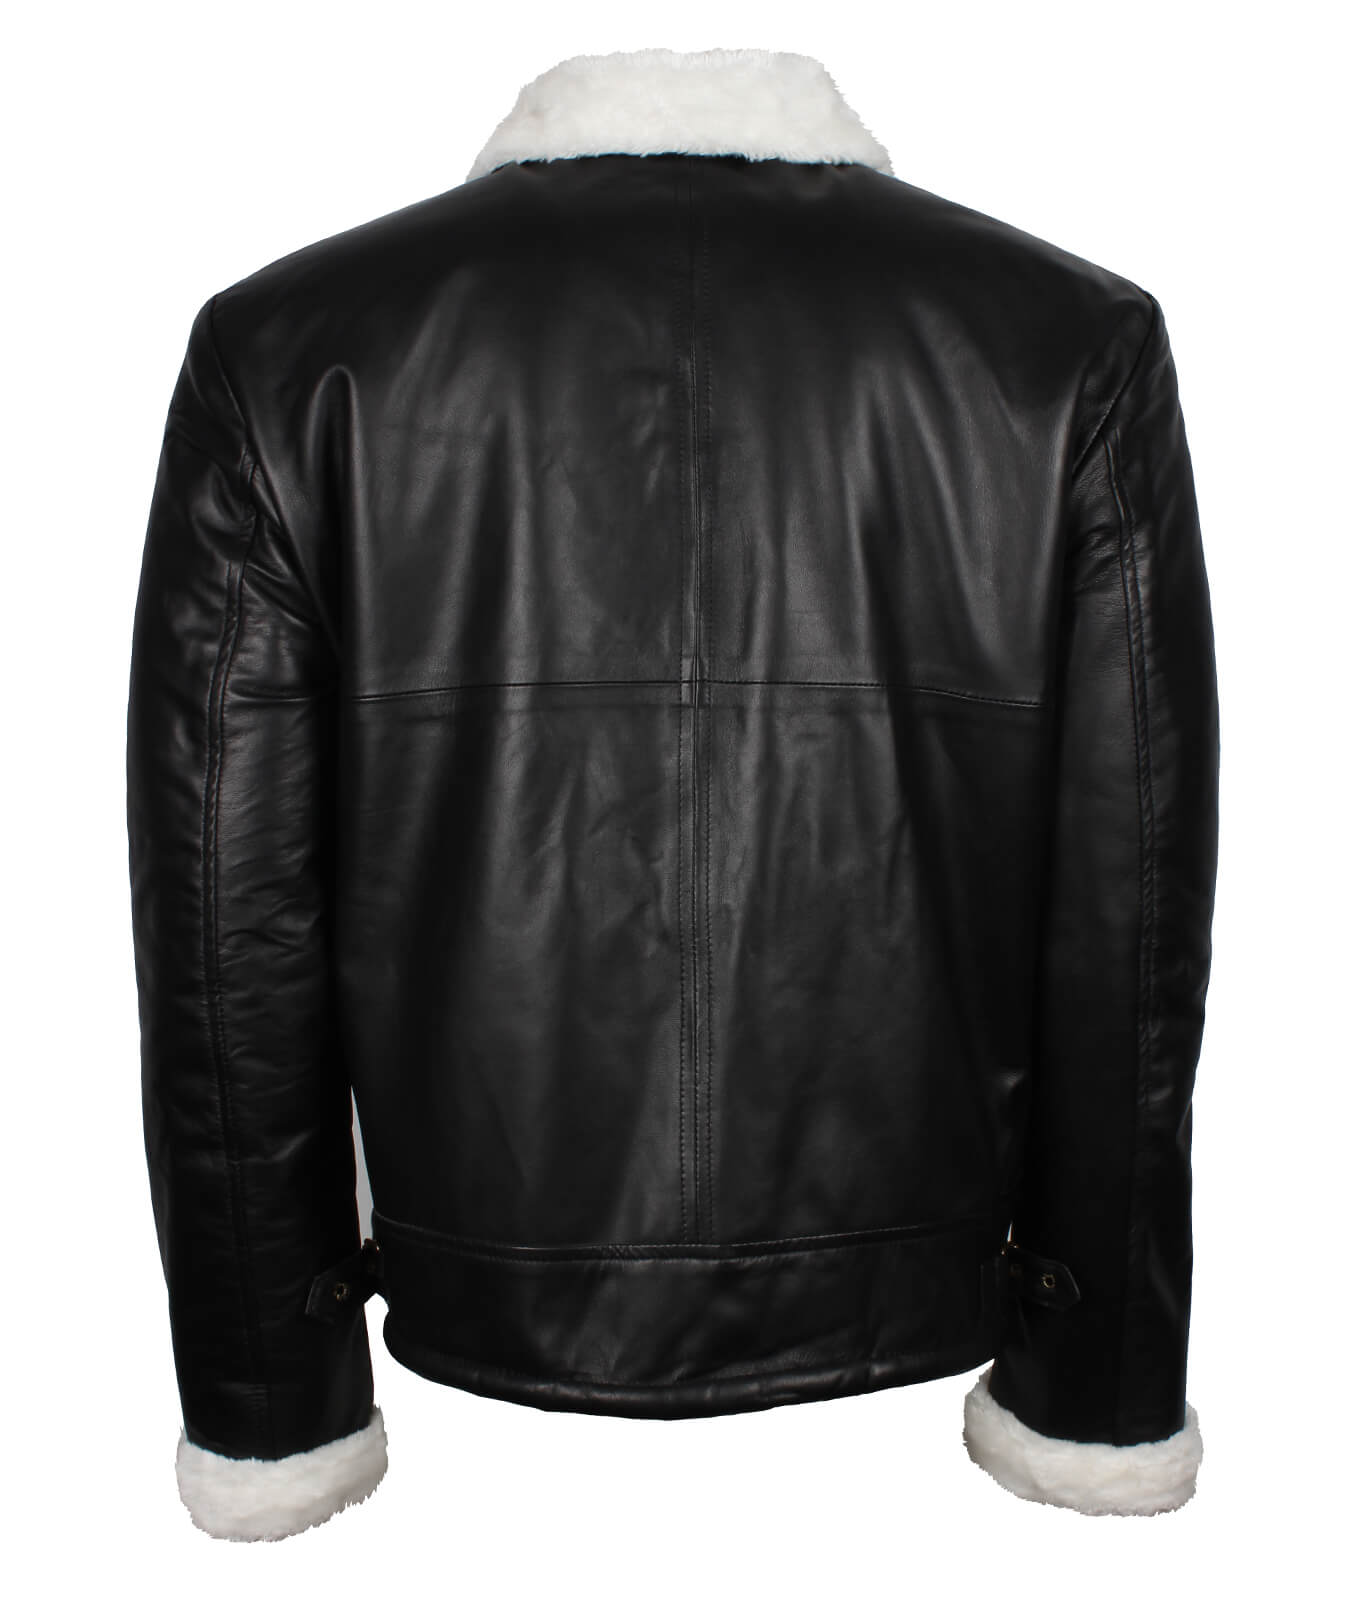 Shearling Black Leather Jacket With Fur Collar